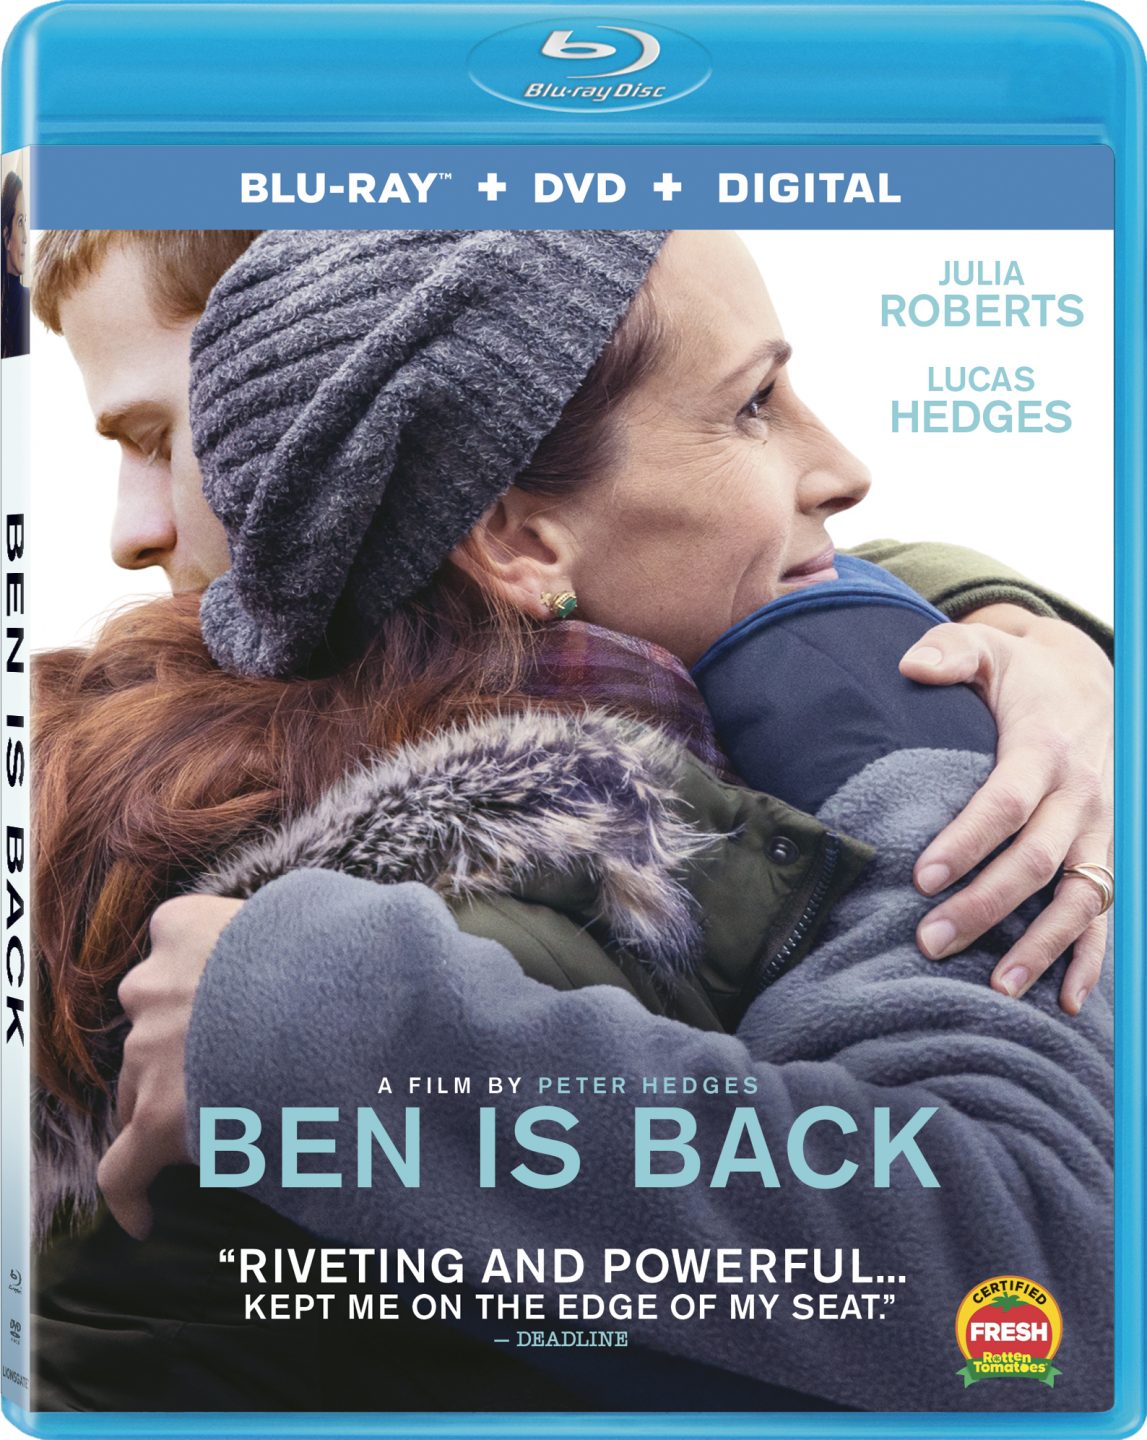 Ben Is Back Blu-Ray Combo Pack cover (Lionsgate Home Entertainment)